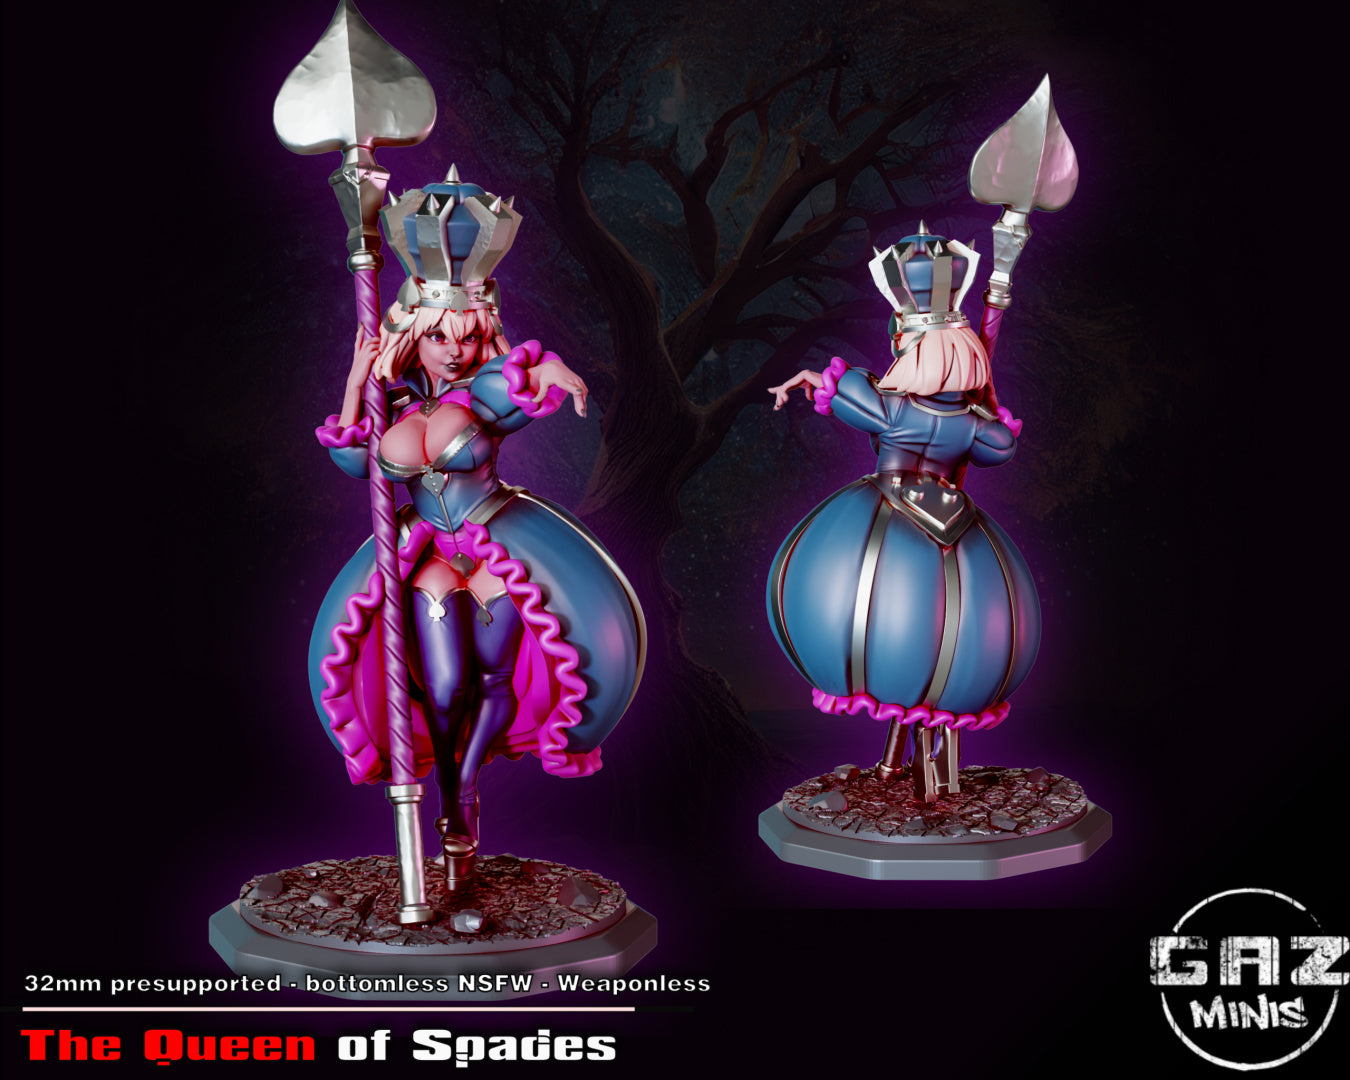 The Queen of Spades by Gaz Minis